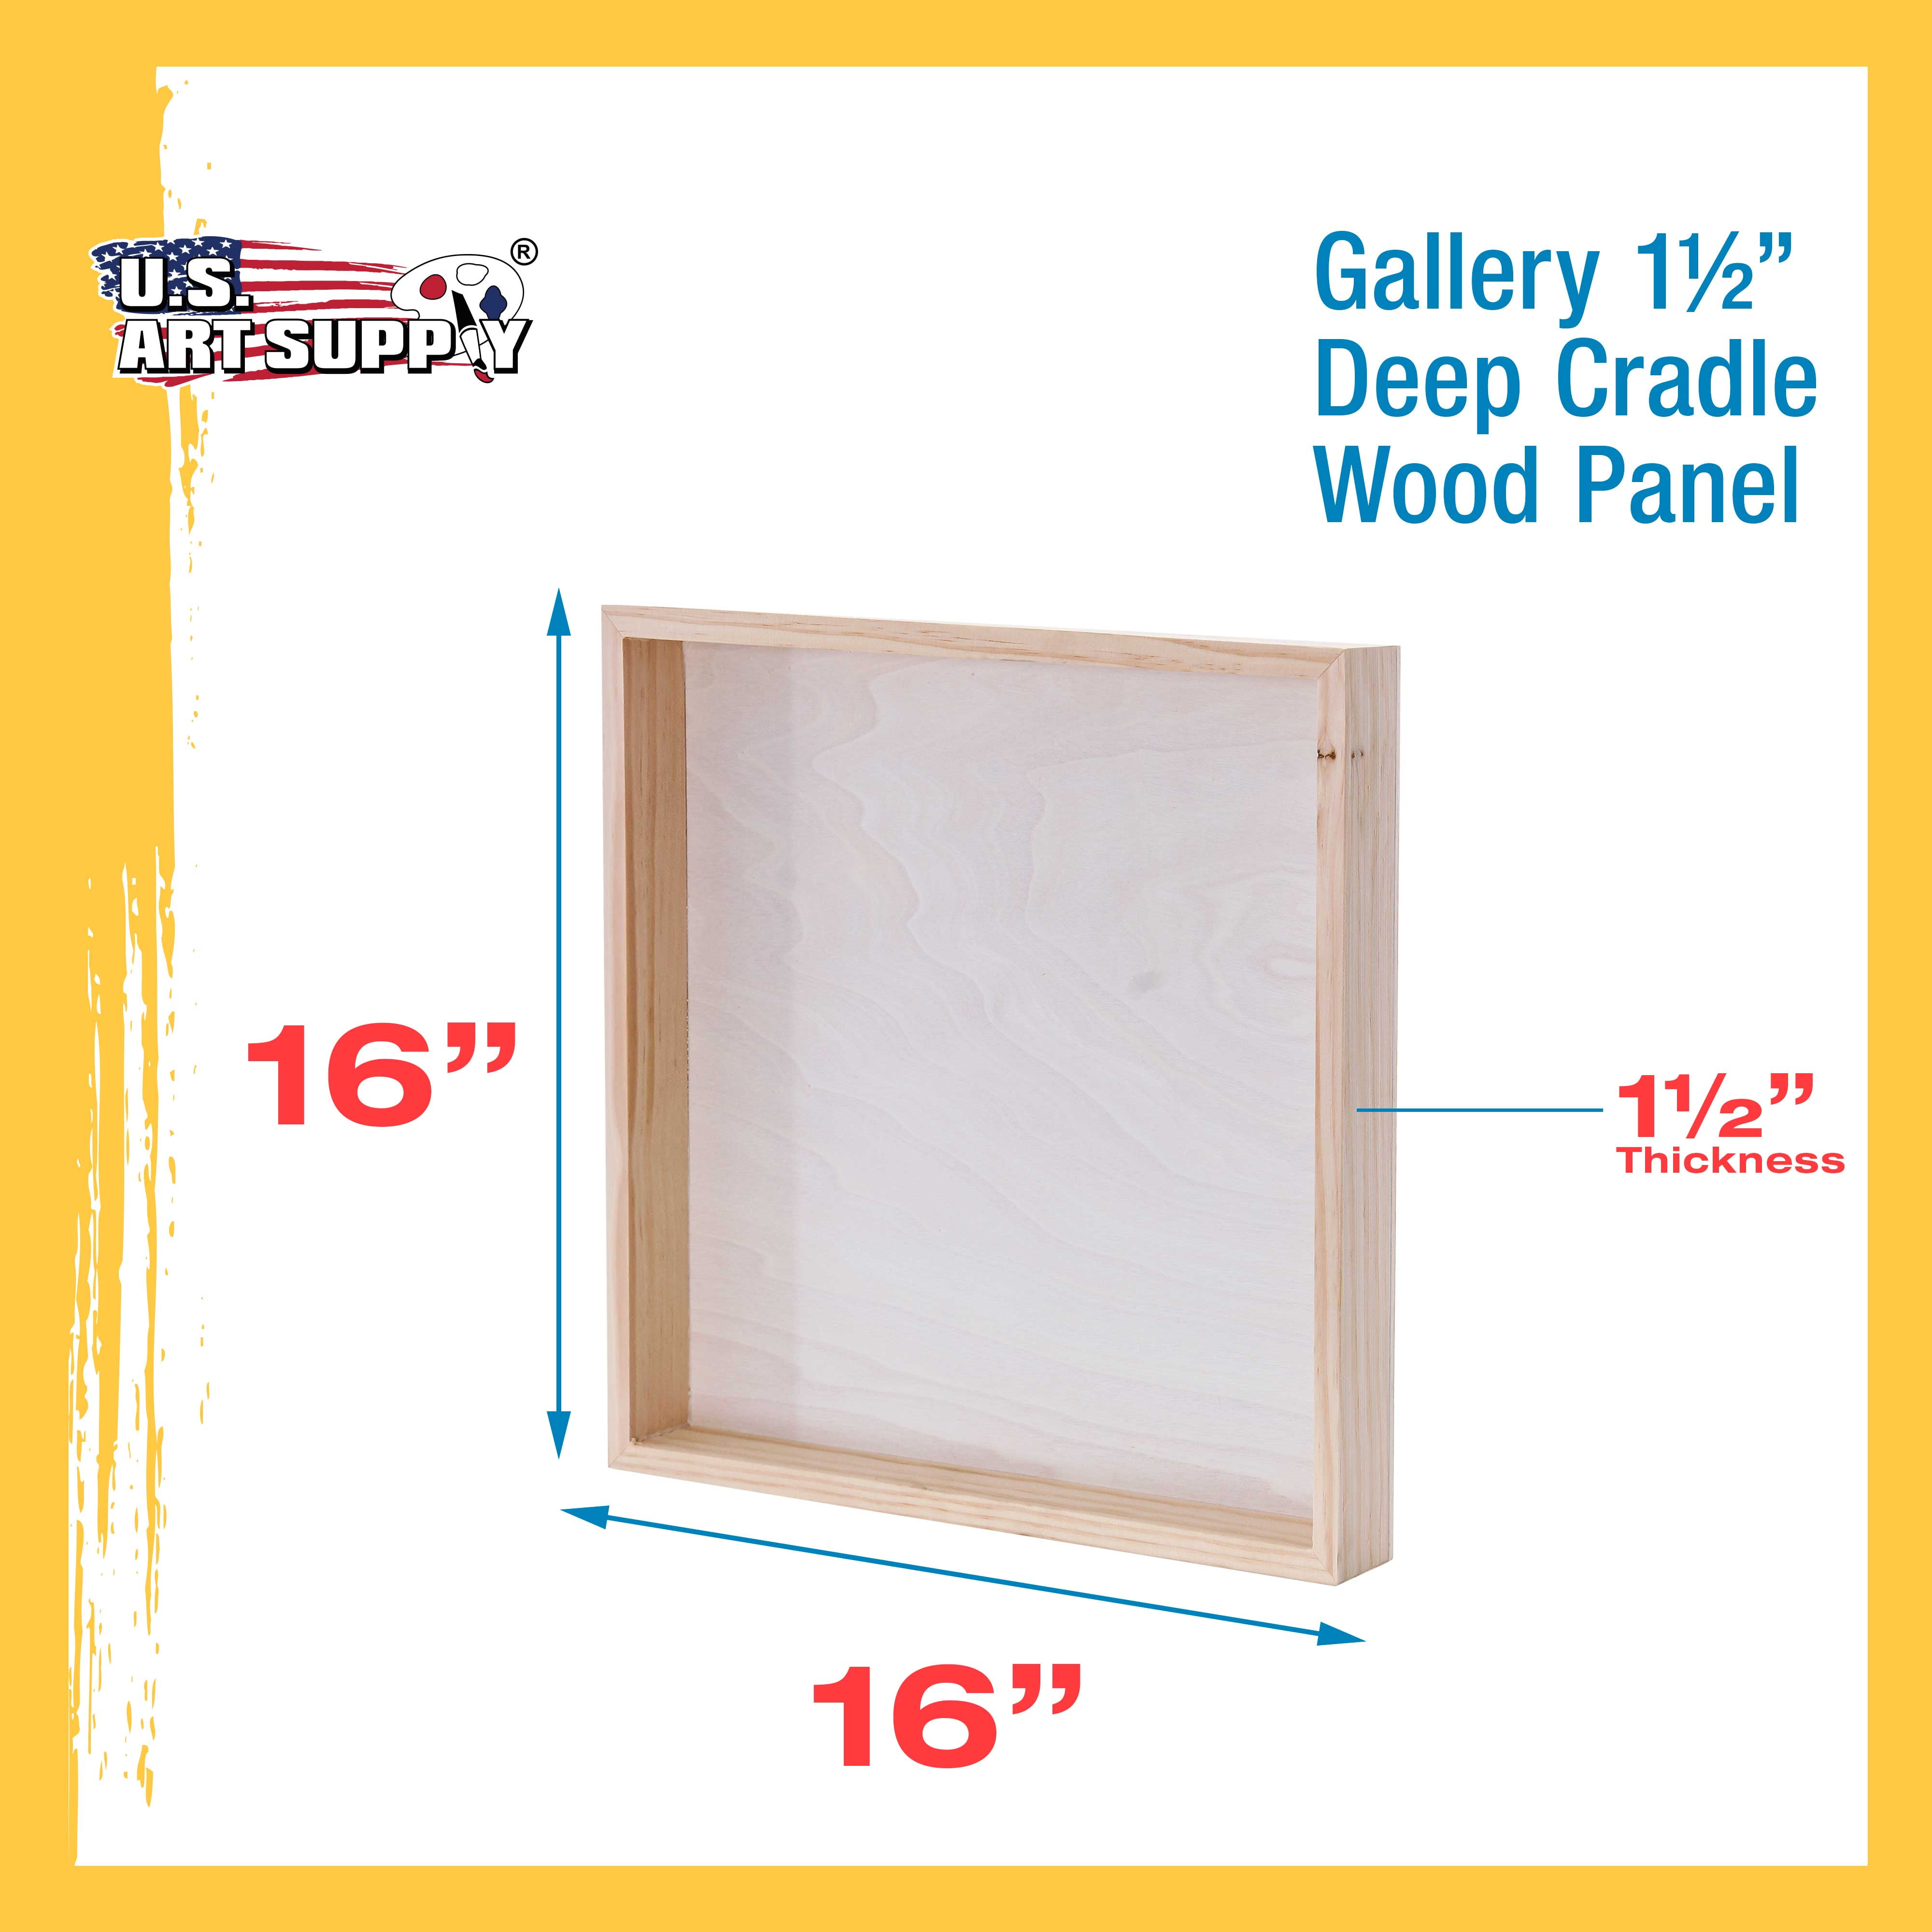 Encaustic - Artist Depth Wooden Wall Canvases Oil Acrylic Gallery 1-1/2 Deep Cradle Pack of 2 U.S Art Supply 16 x 16 Birch Wood Paint Pouring Panel Boards Painting Mixed-Media Craft